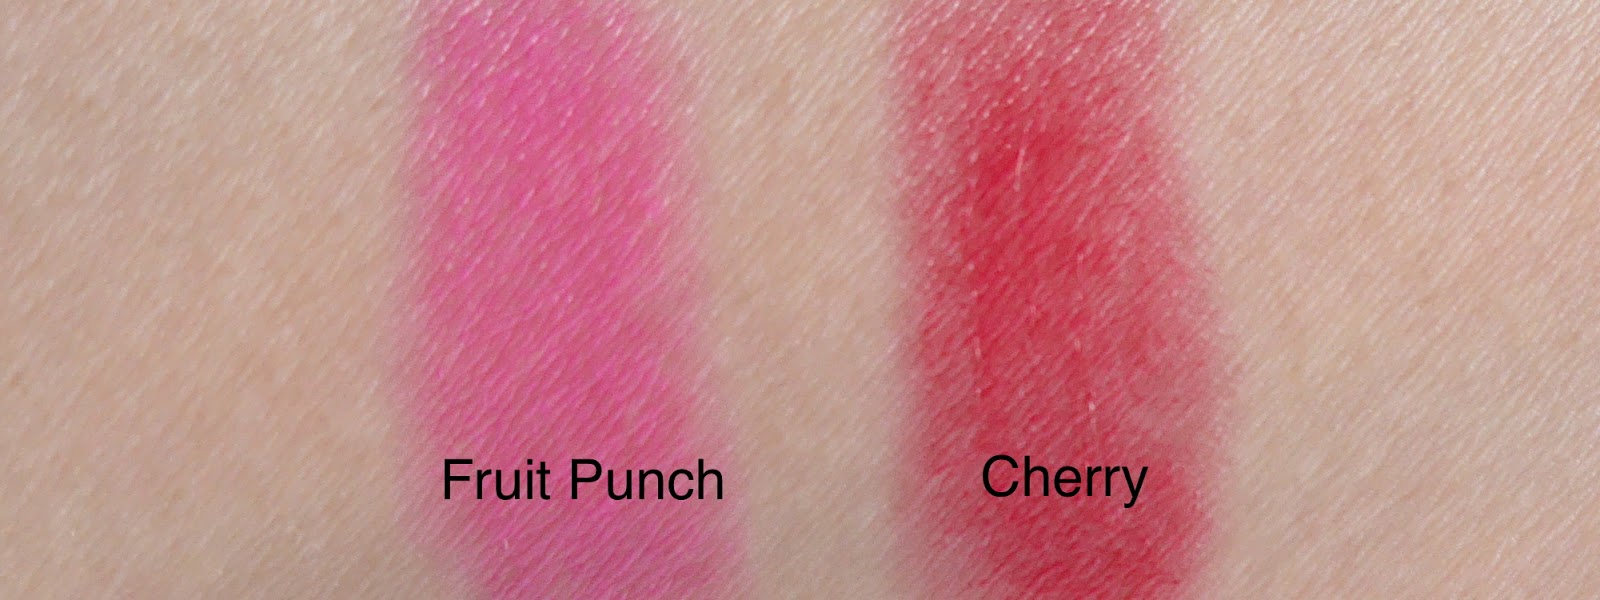 annabelle lipsies cherry fruit punch review swatch